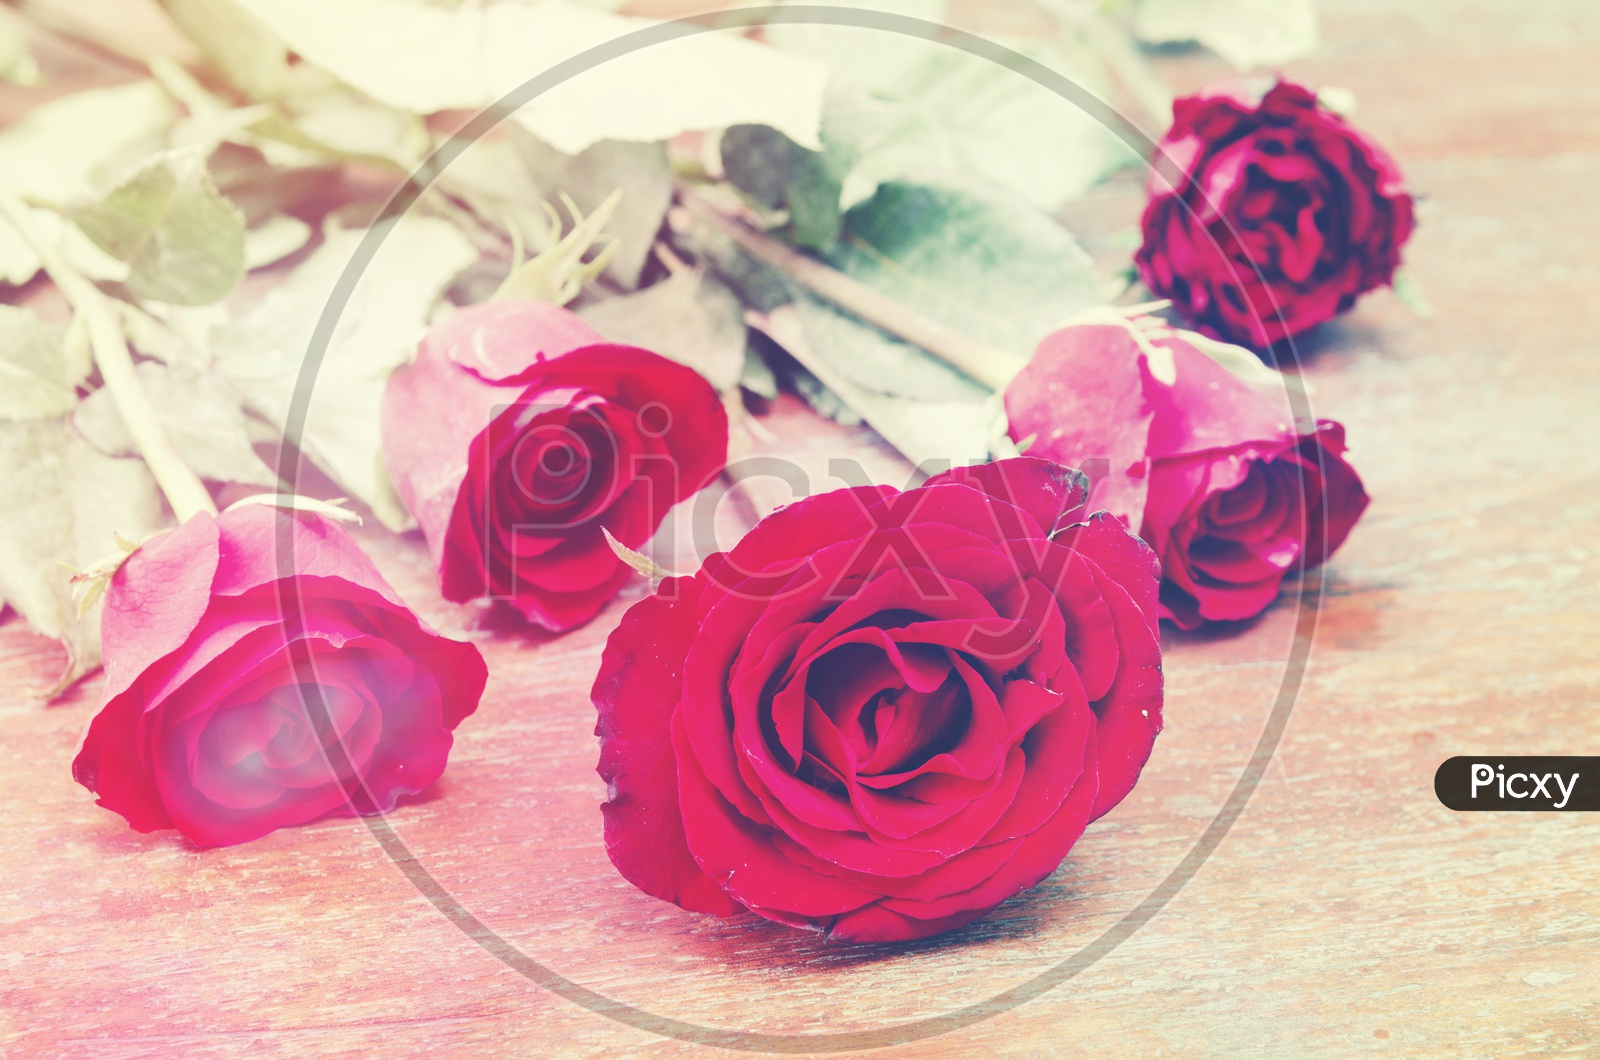 Retro Rose Flowers On Wooden Background With Vintage Filter